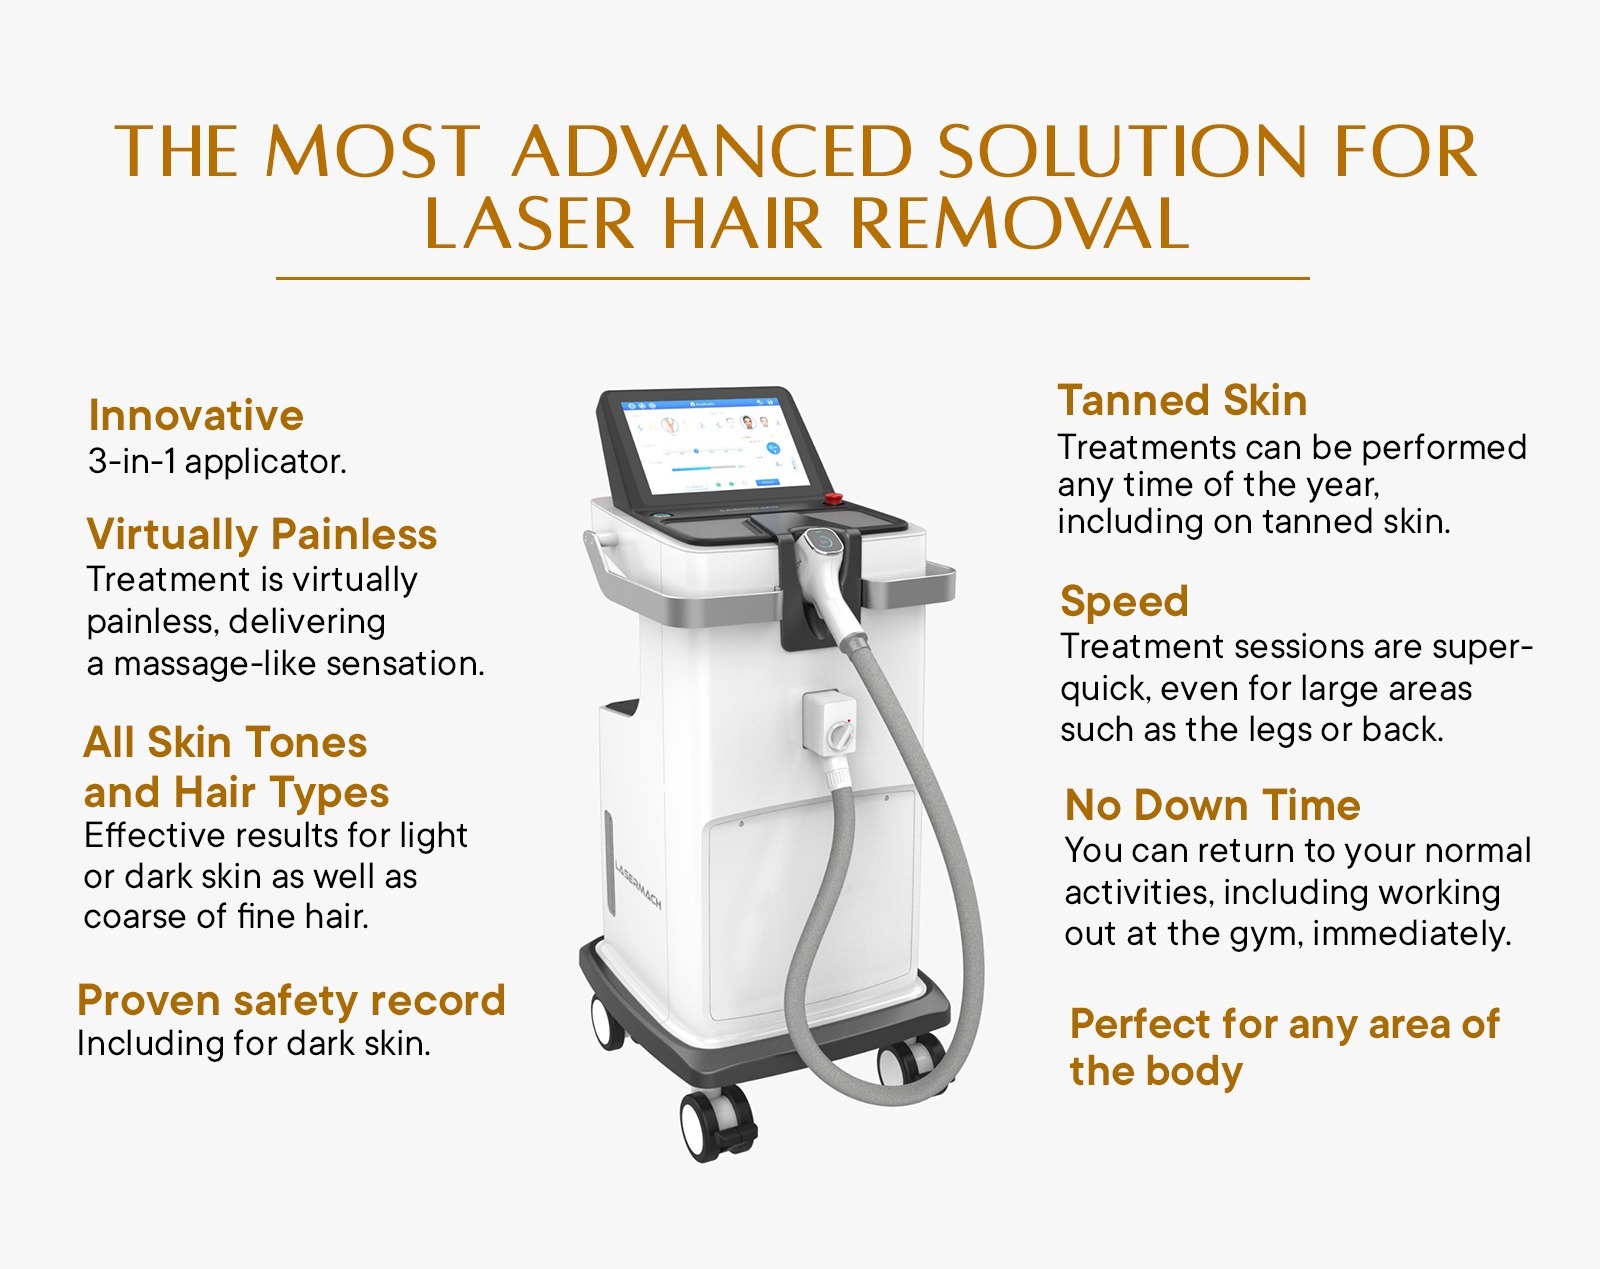 The Most Advanced Solution for LASER HAIR REMOVAL